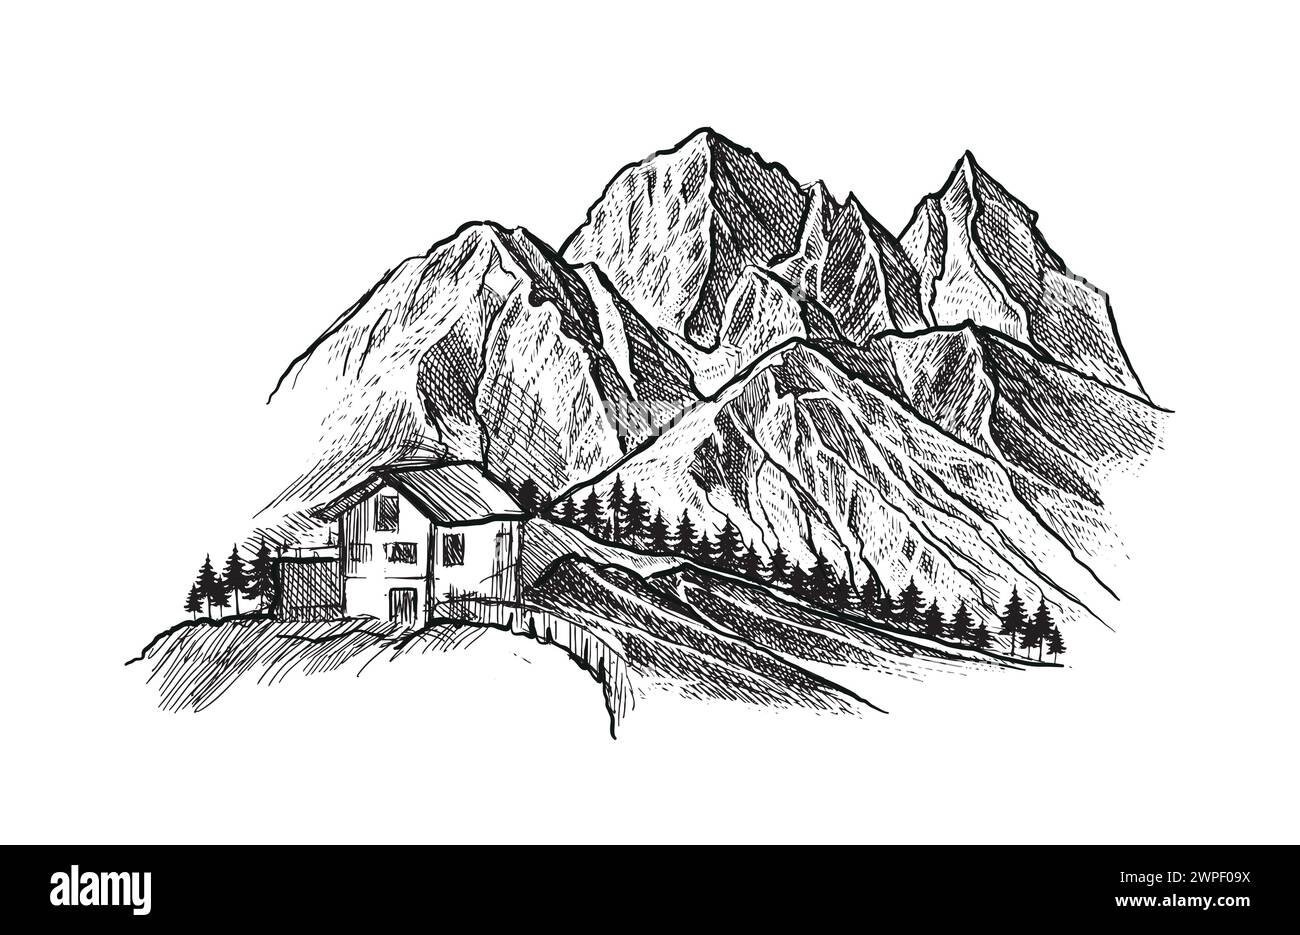 Mountain with pine trees and landscape black on white background. Hand drawn rocky peaks in sketch style. Vector illustration. Stock Vector